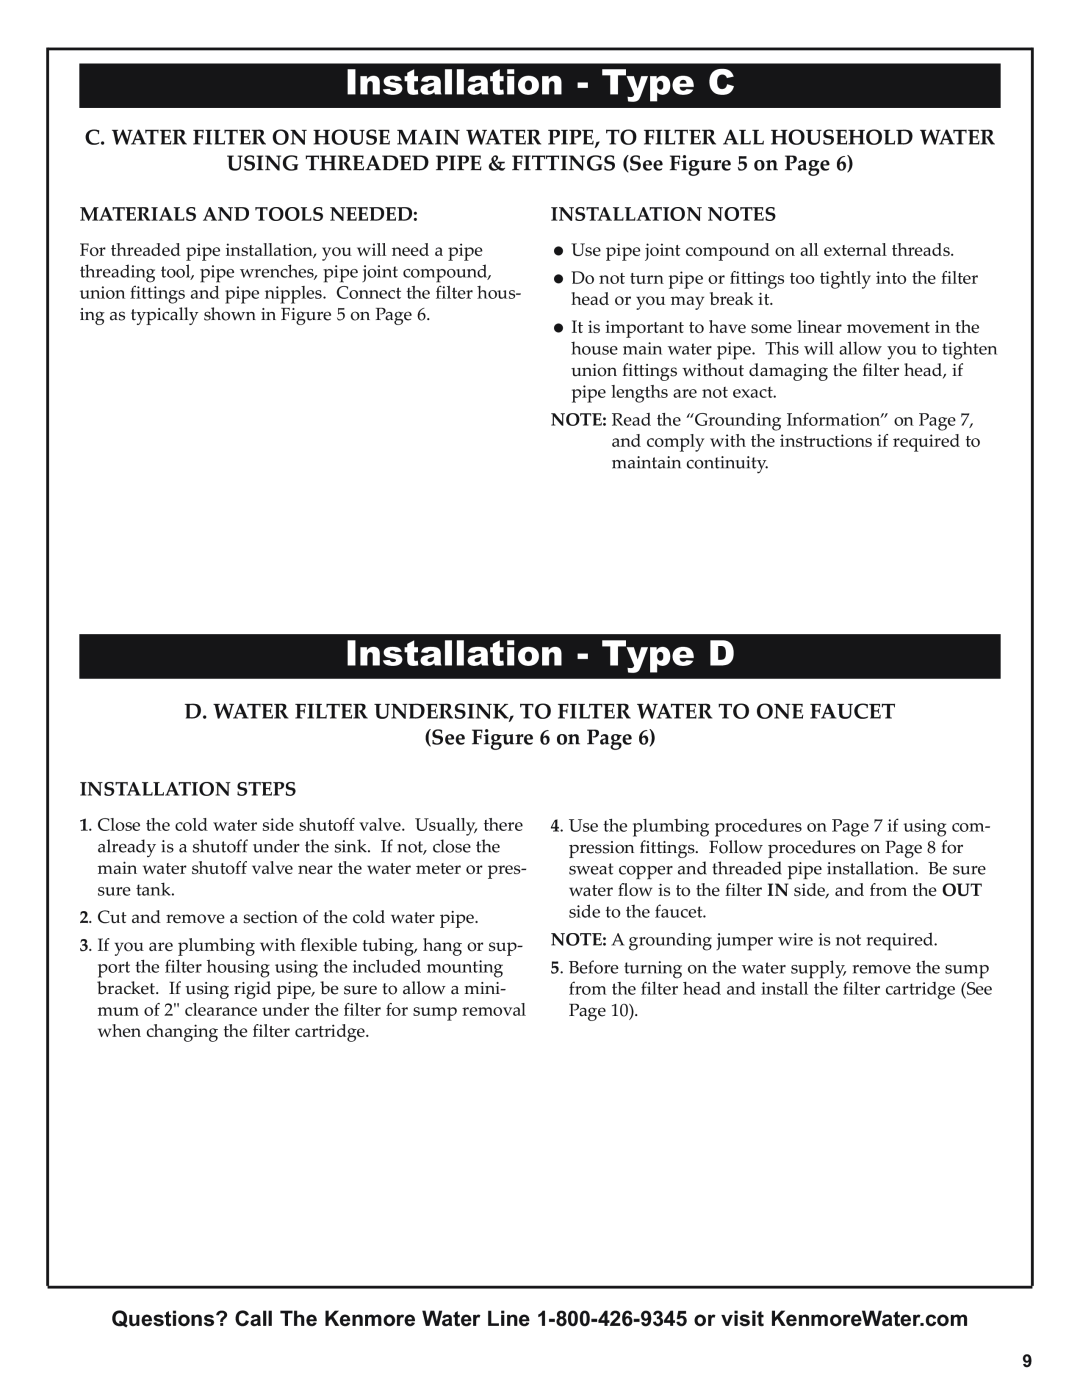 Kenmore 625.38448 owner manual Installation - Type C, Installation - Type D, USING THREADED PIPE & FITTINGS See on Page 